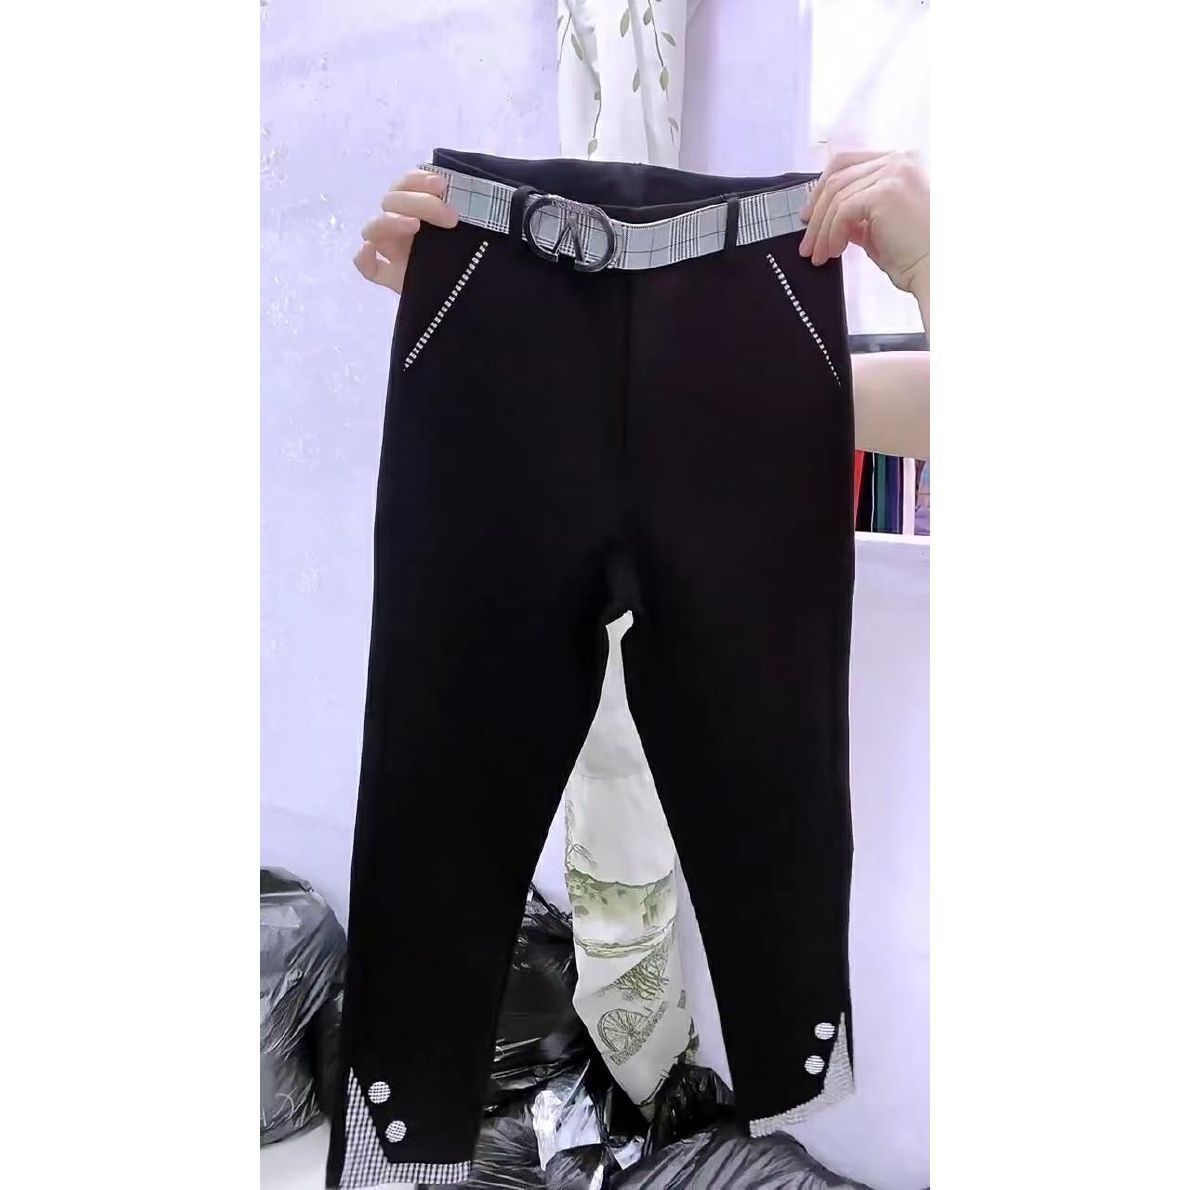 Summer new white all-match small trousers women's high waist elastic stitching plaid nine-point pants fashion pants